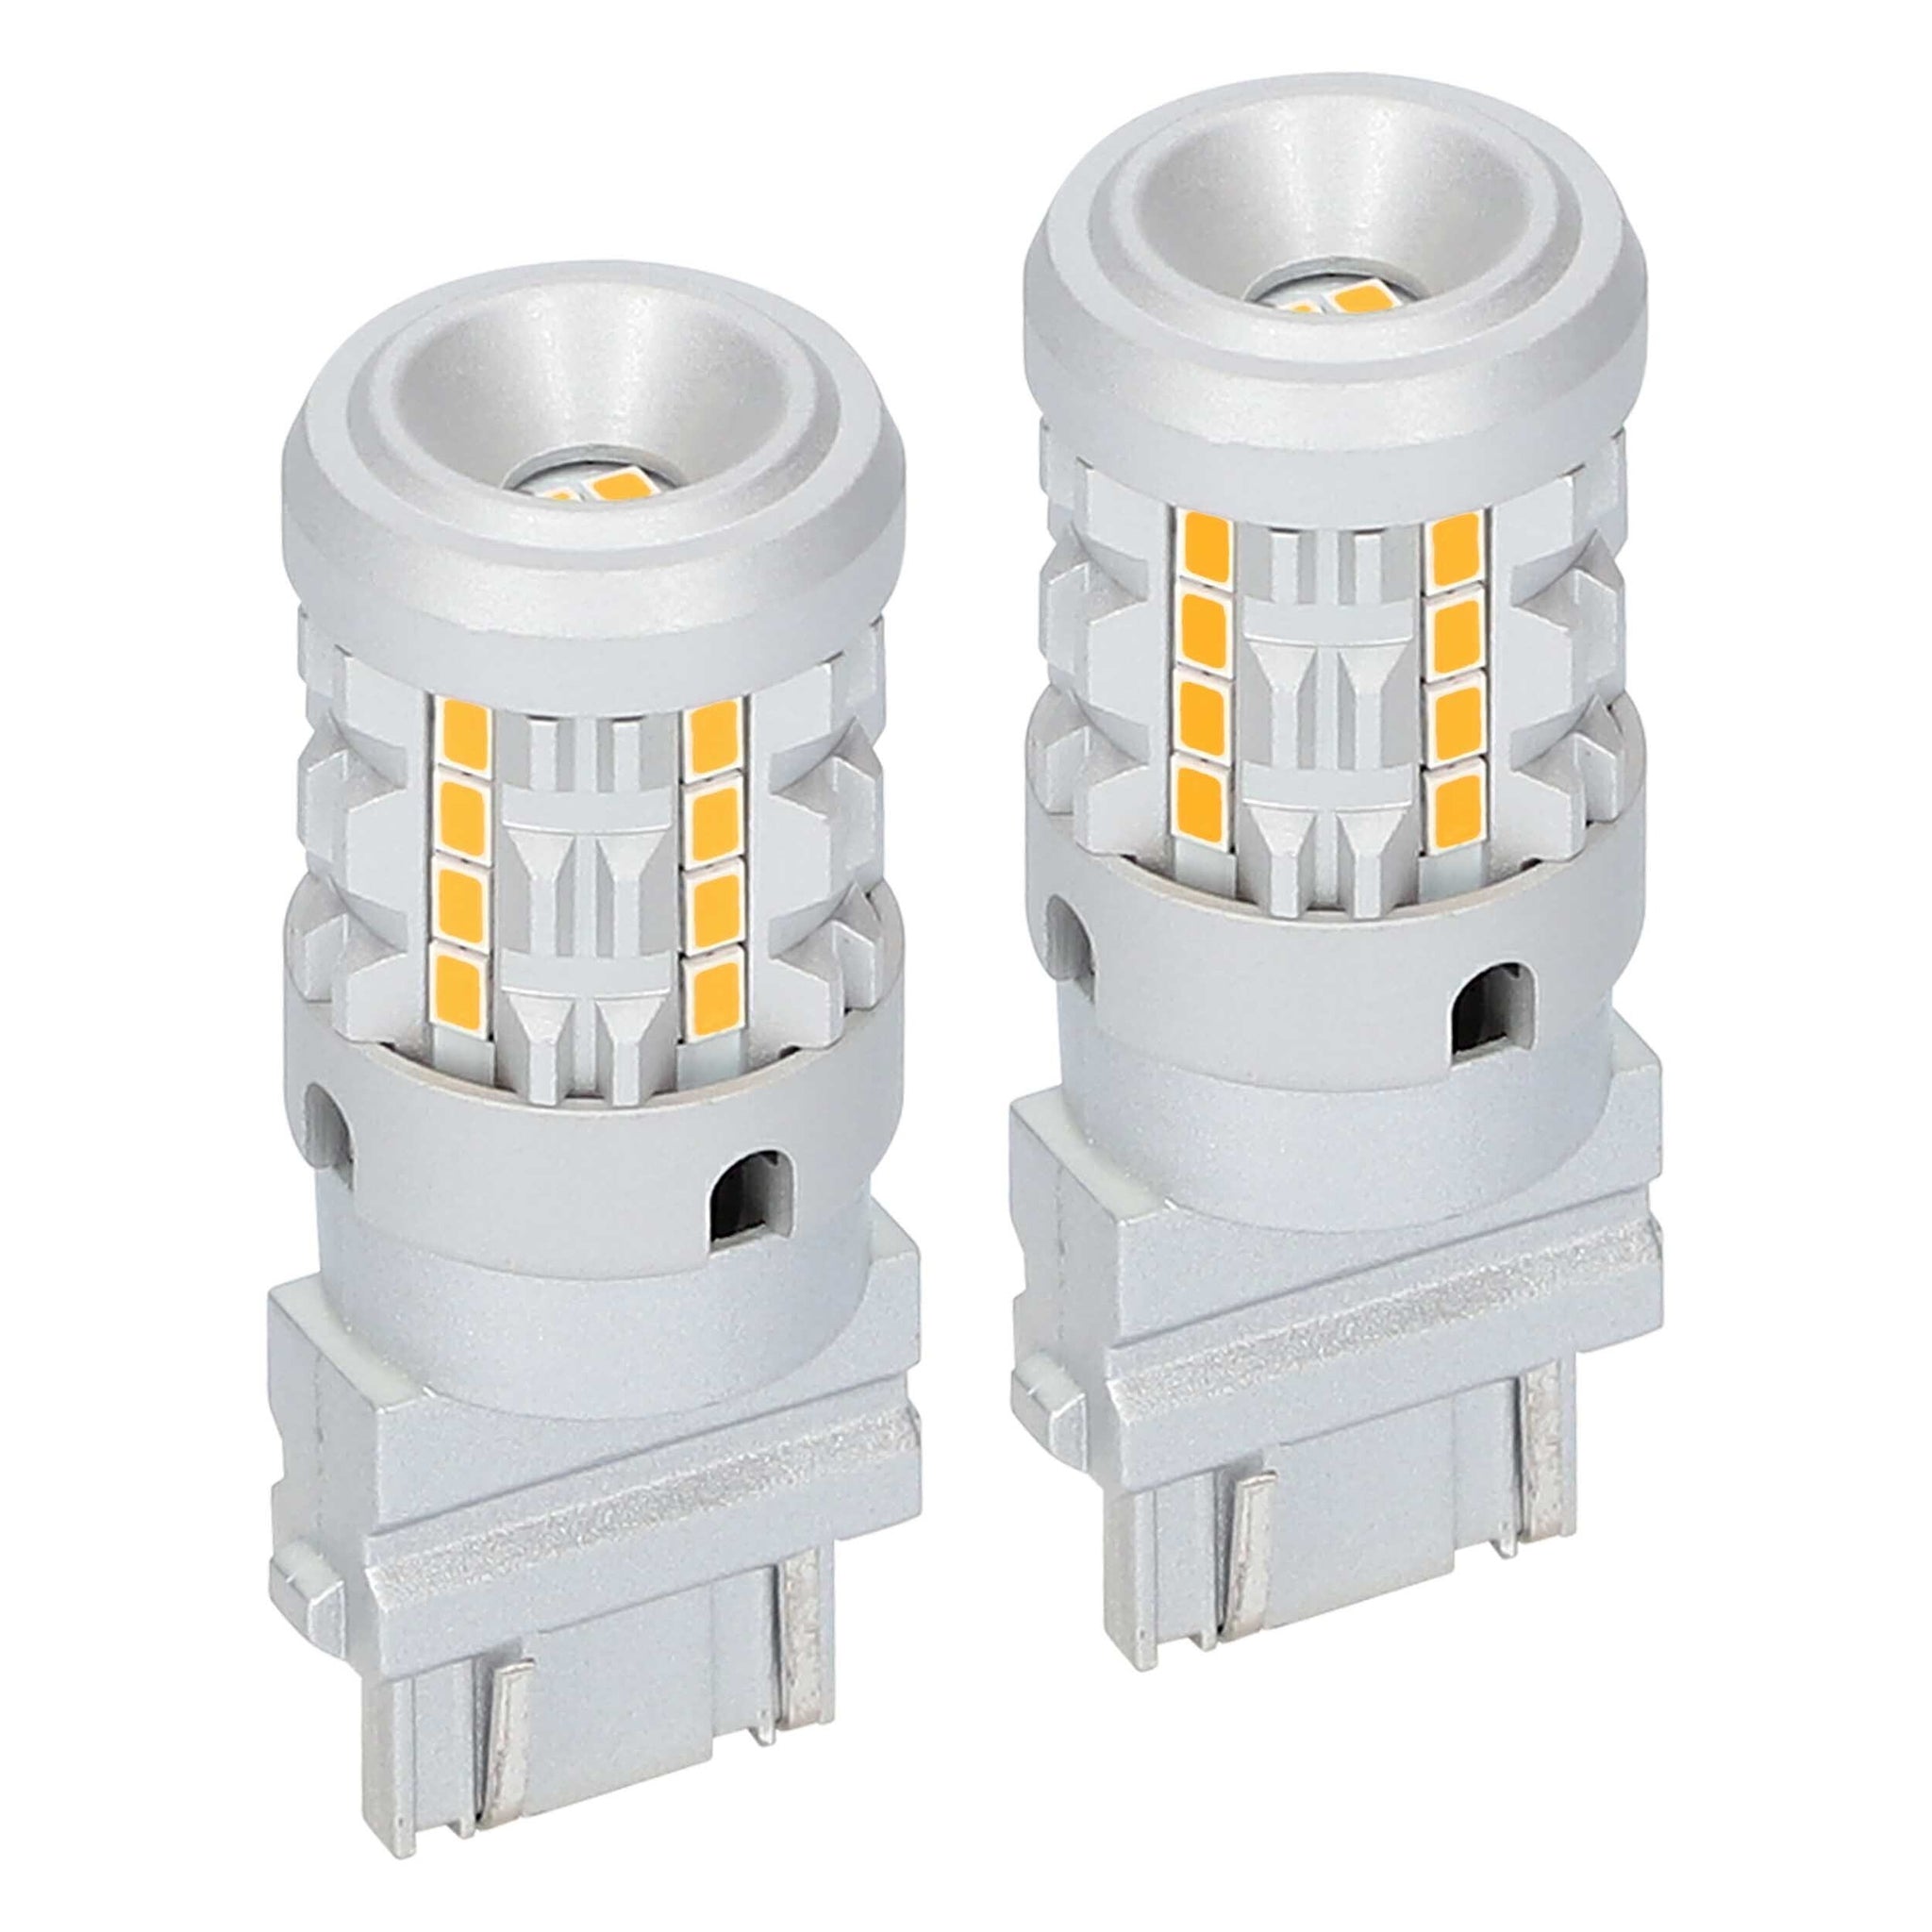 Heise HE-C3157A 3157 Amber Bulbs with Integrated Internal CANBUS System - 2-